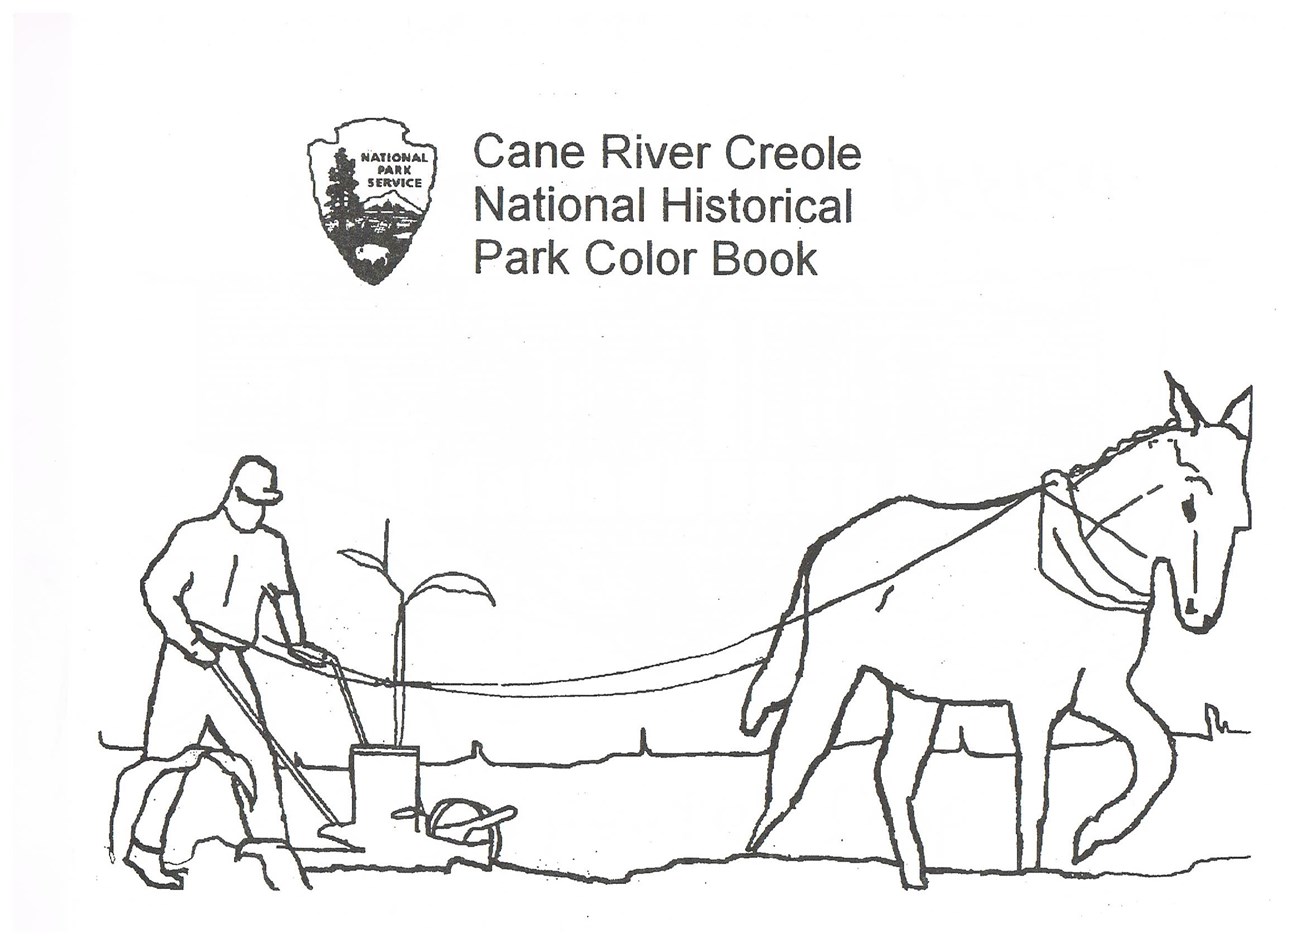 Drawing of a man plowing with a mule.